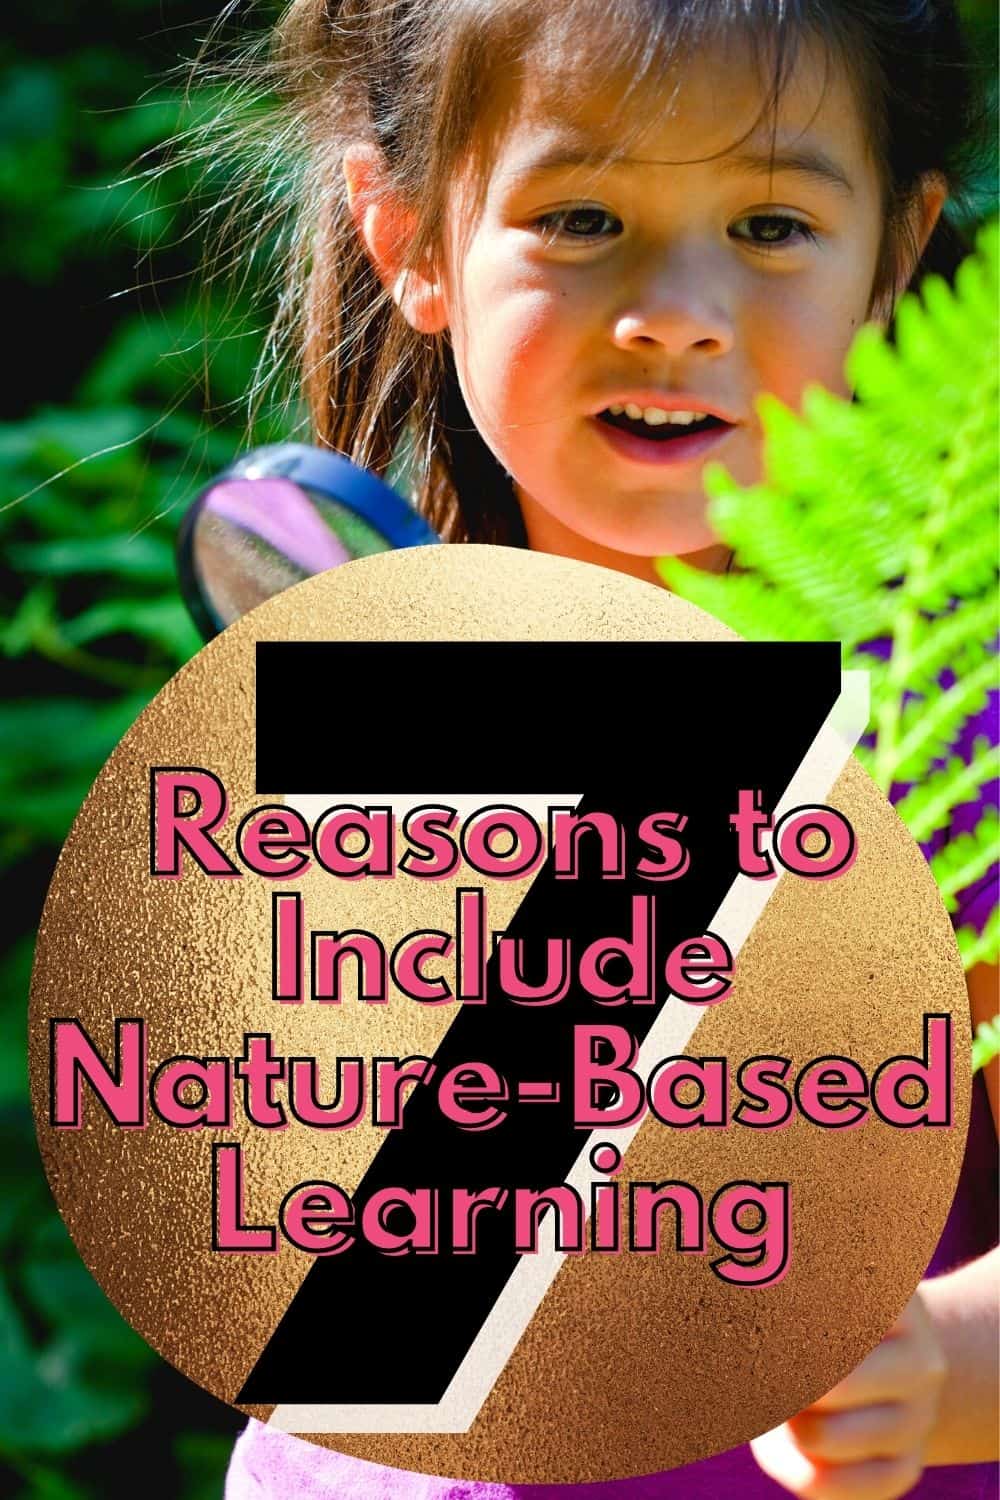 7 Reasons to Include Nature-Based Learning